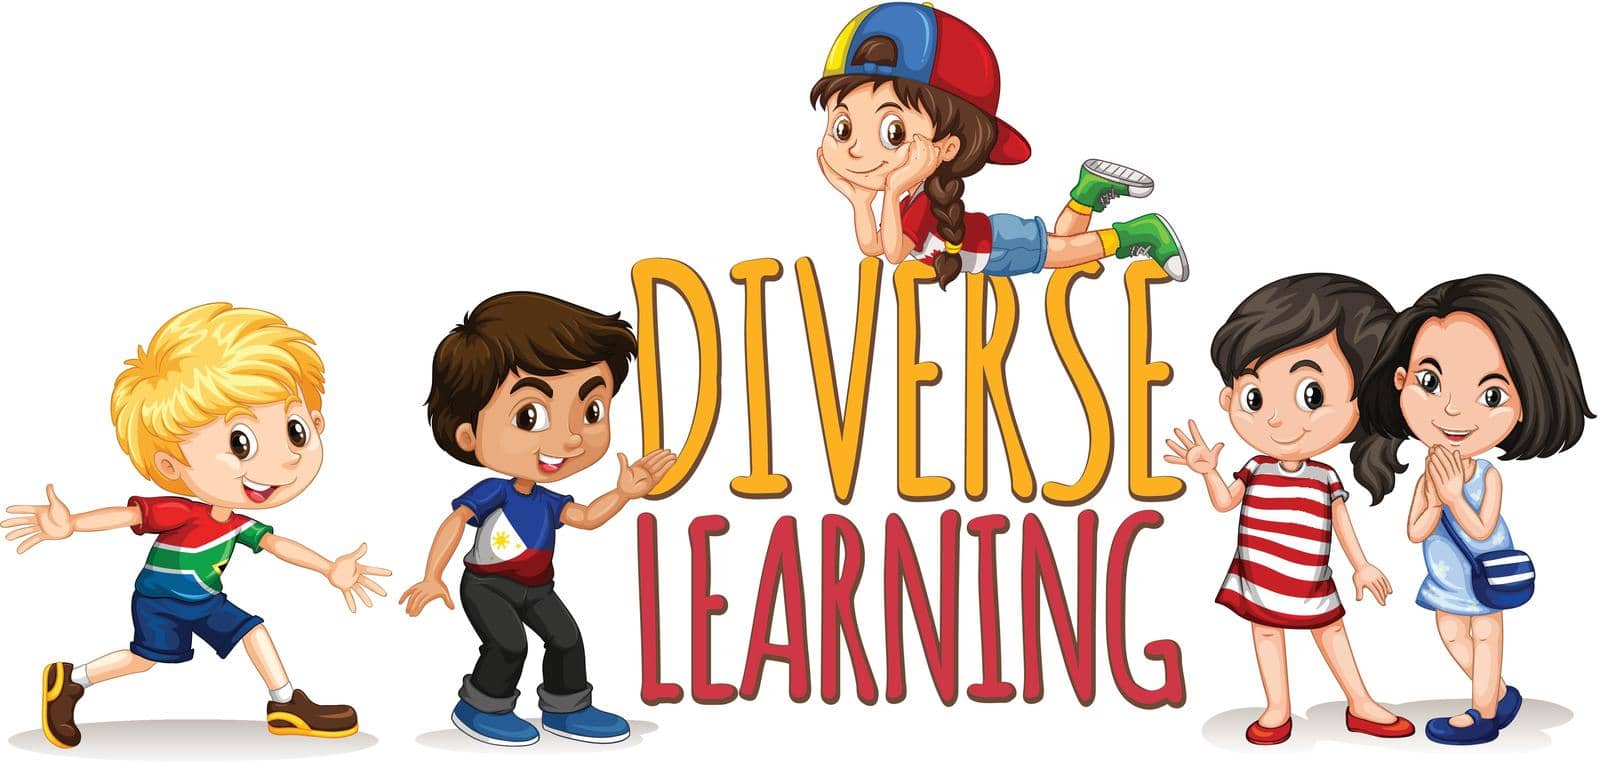 Children on diverse learning sign by iimages